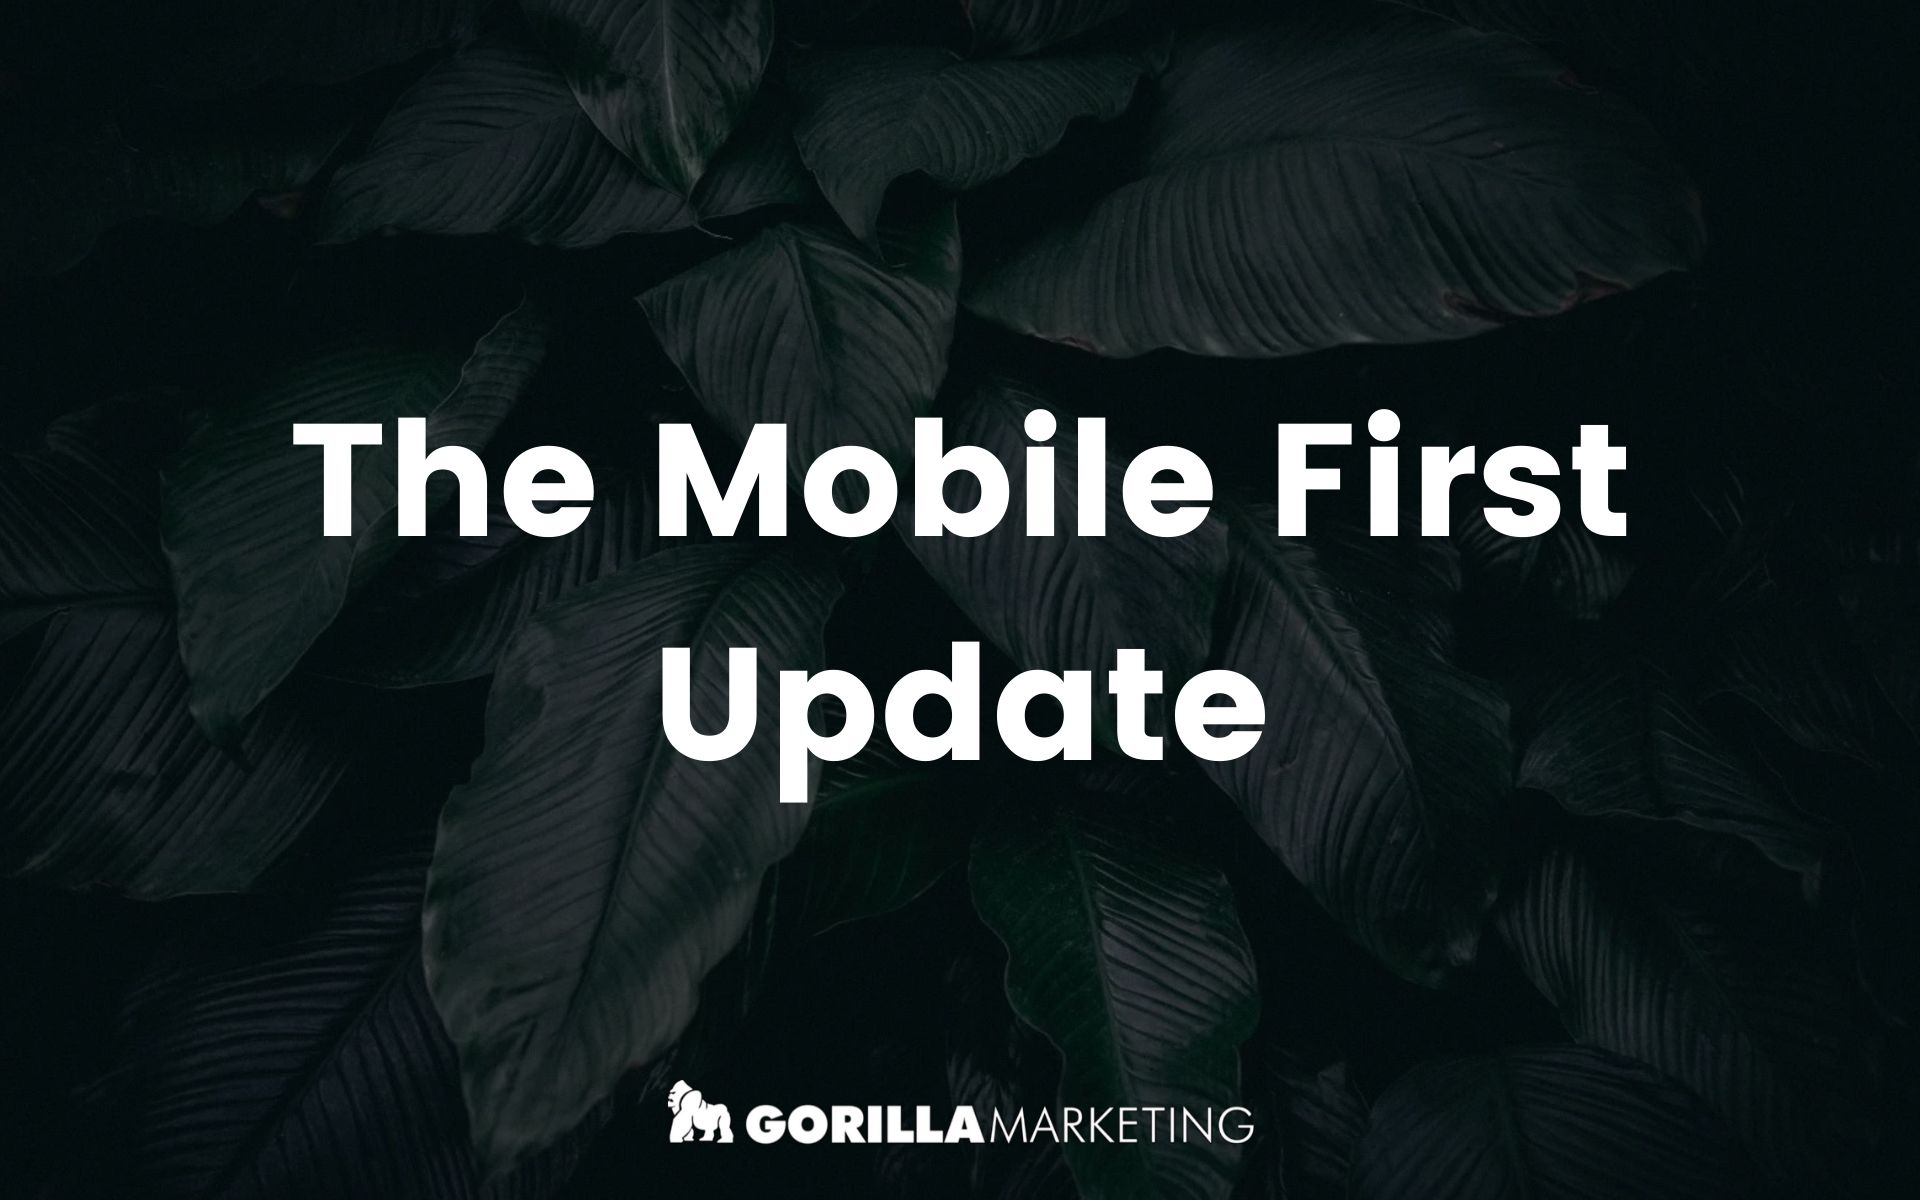 Mobile First Update